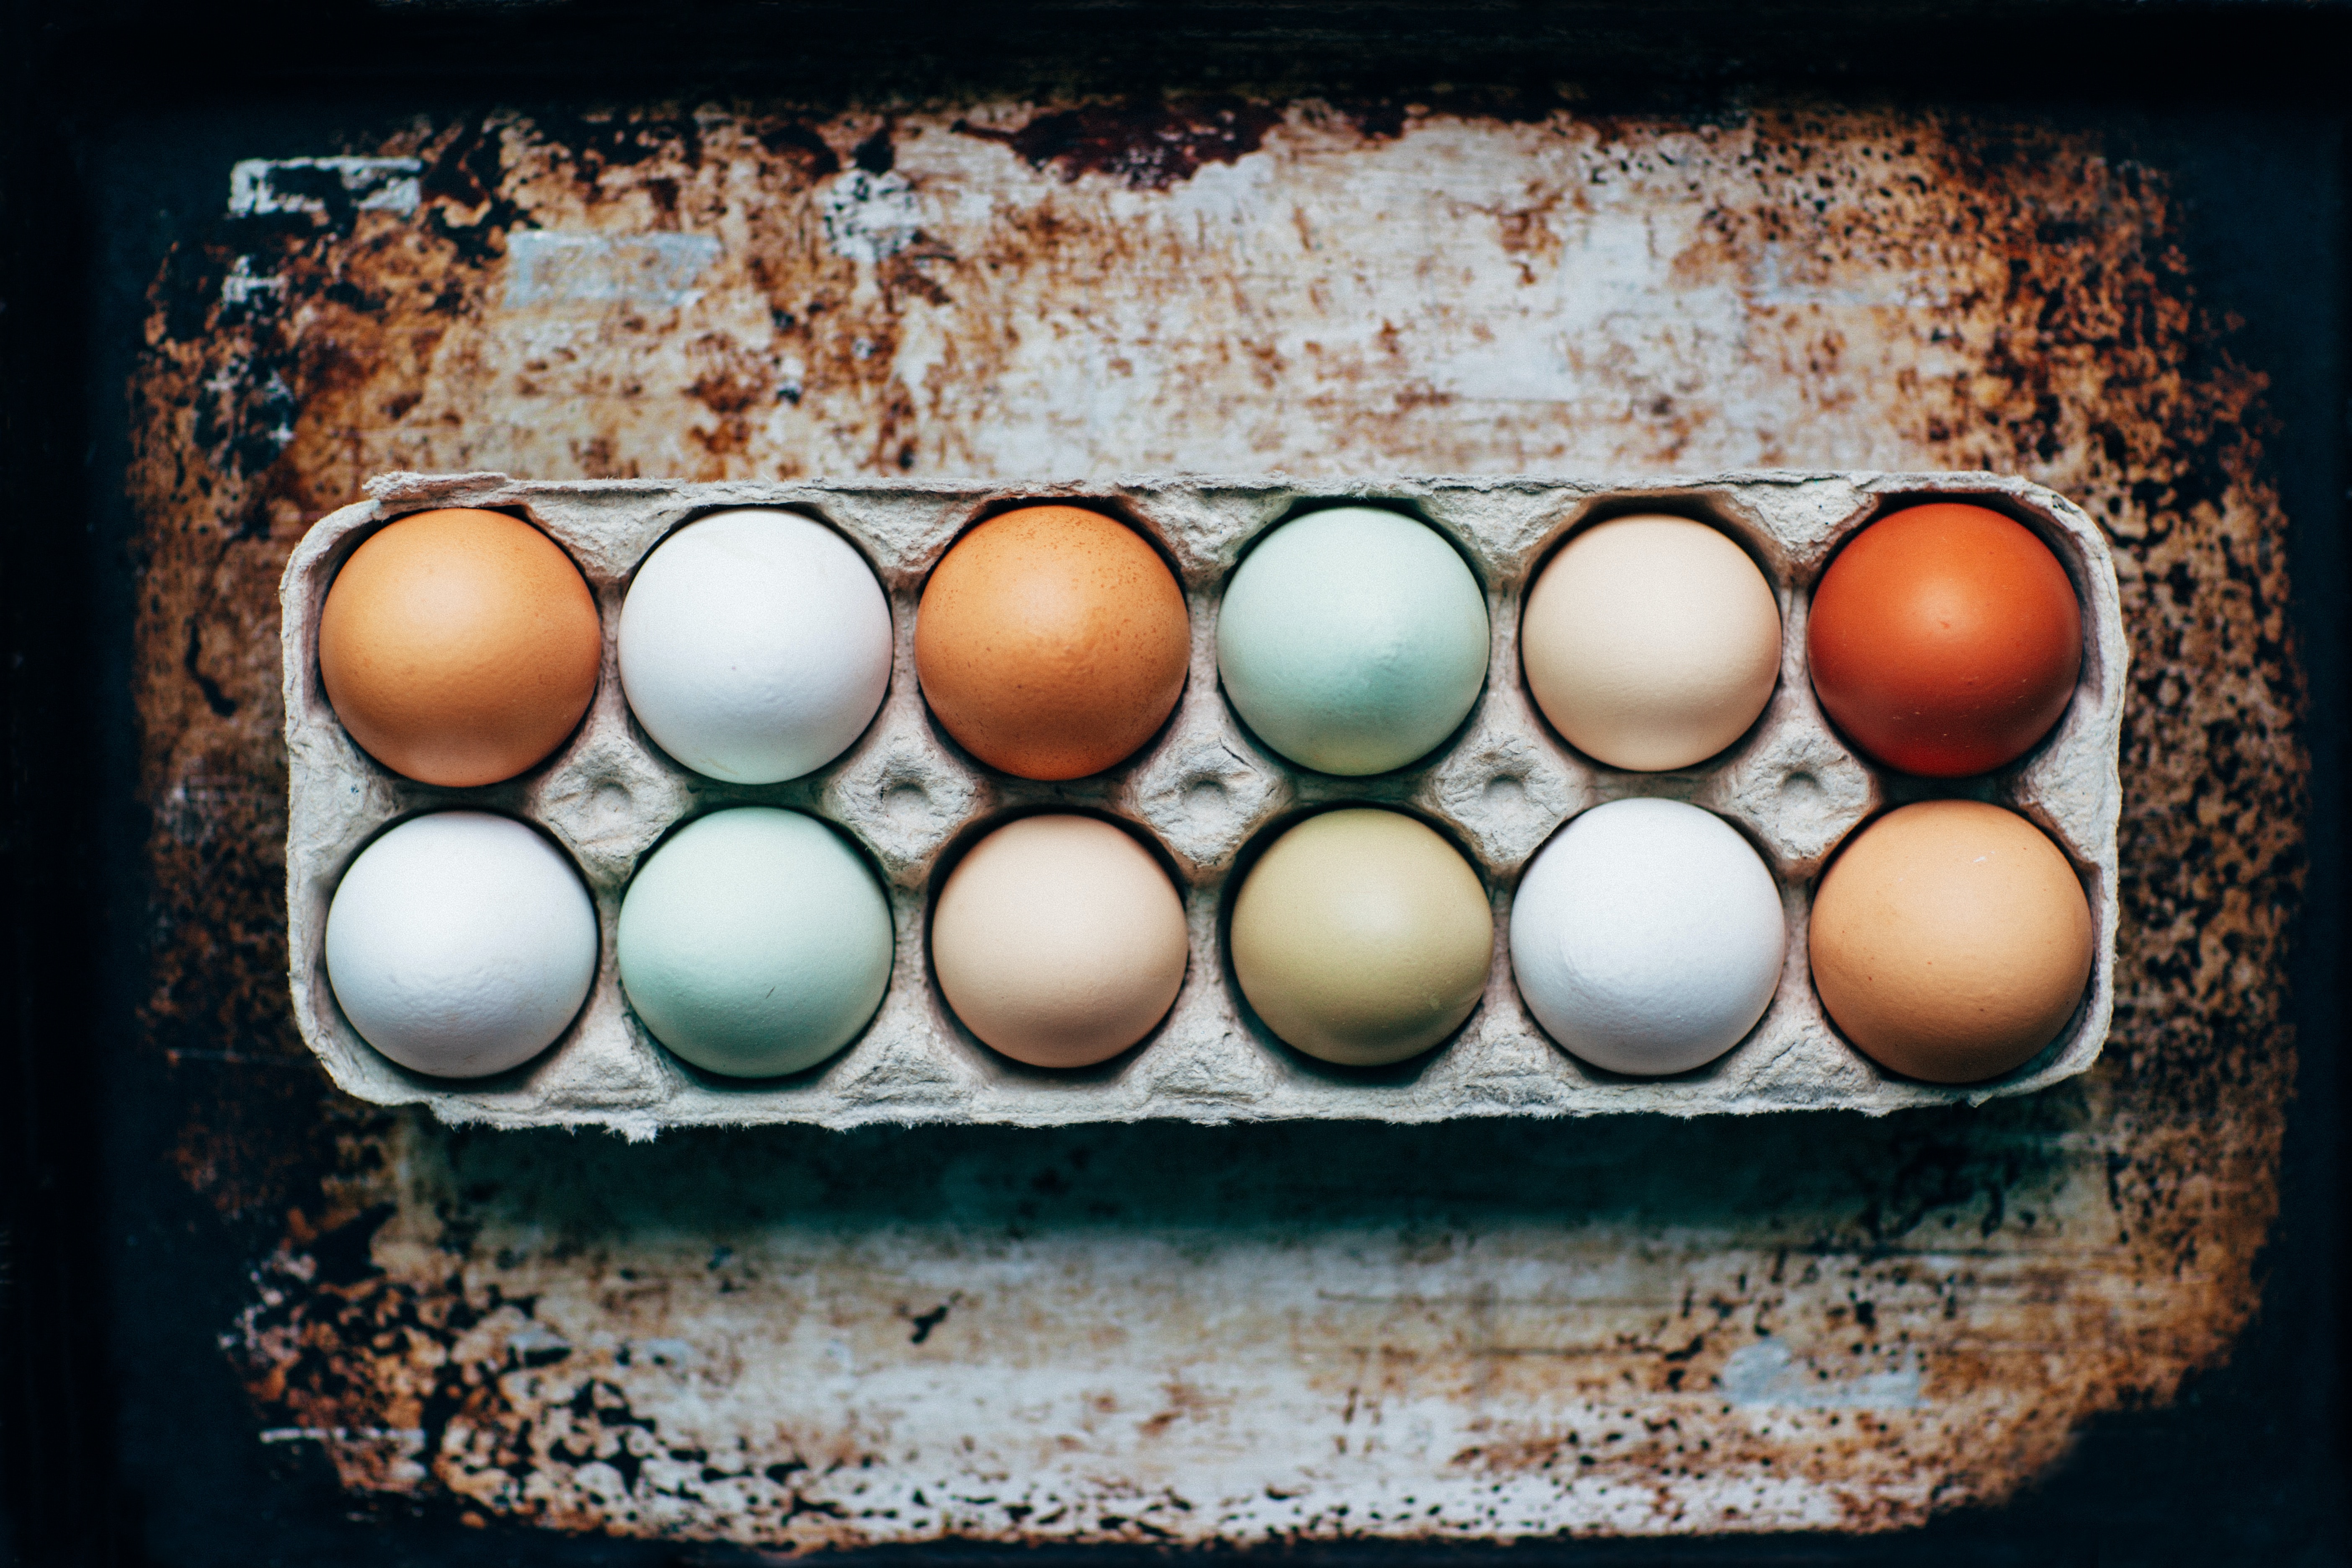 Development of plant-based egg project rated 'Outstanding' by Innovate UK